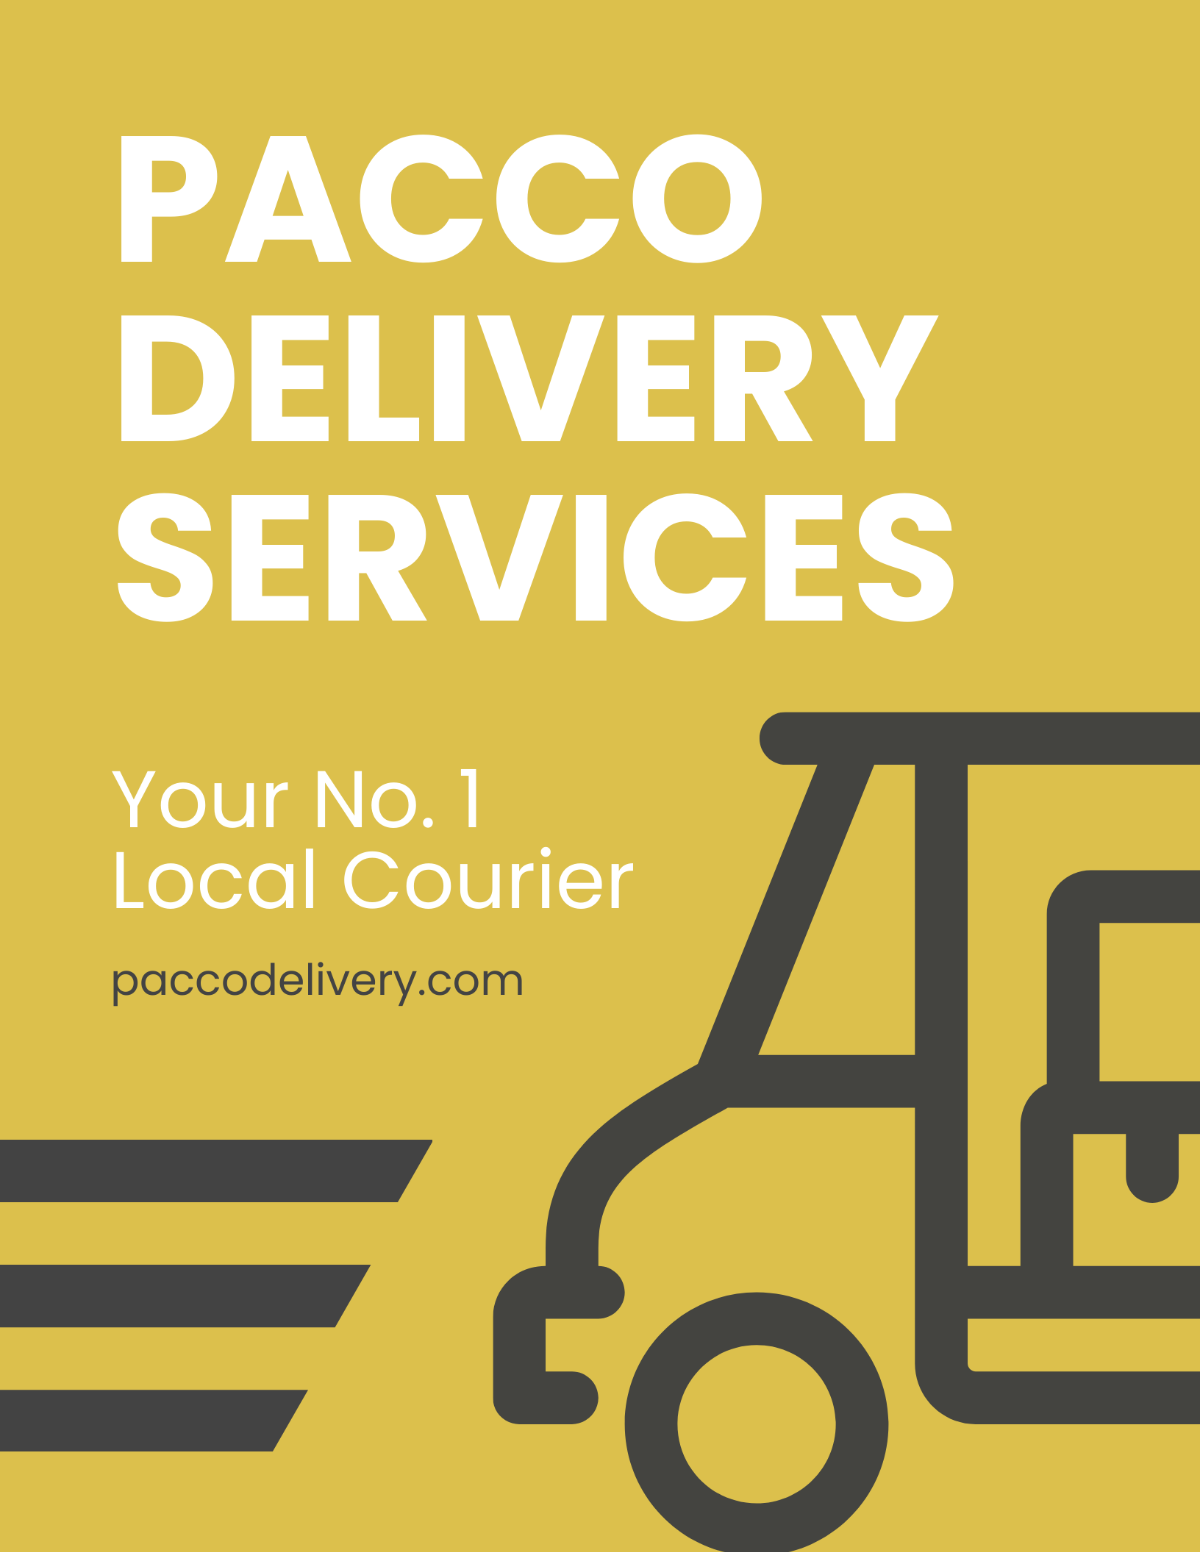 Package Delivery Flyer